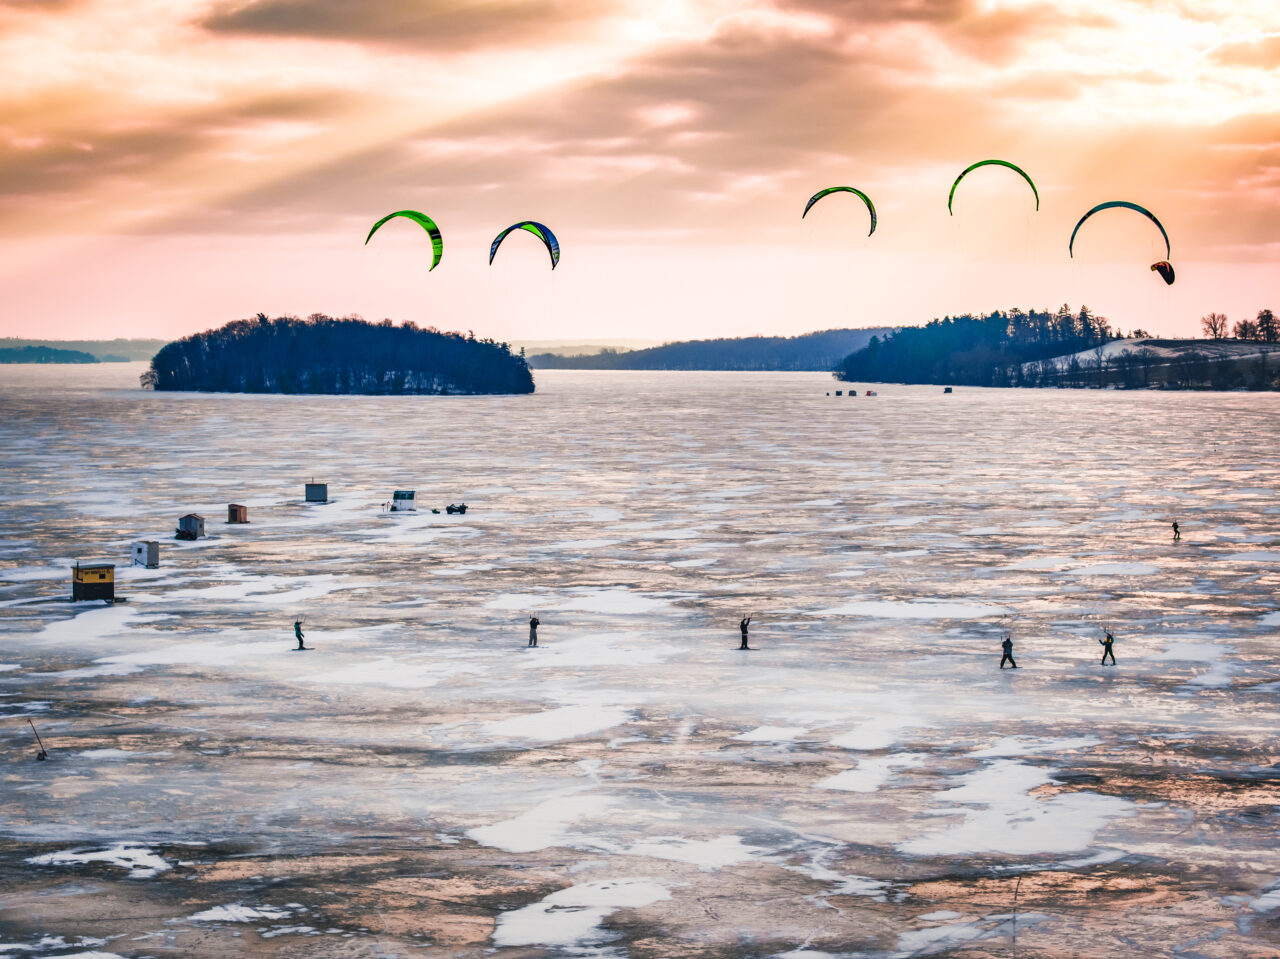 winter sunset over frozen Rice Lake with 5 people snow kiting